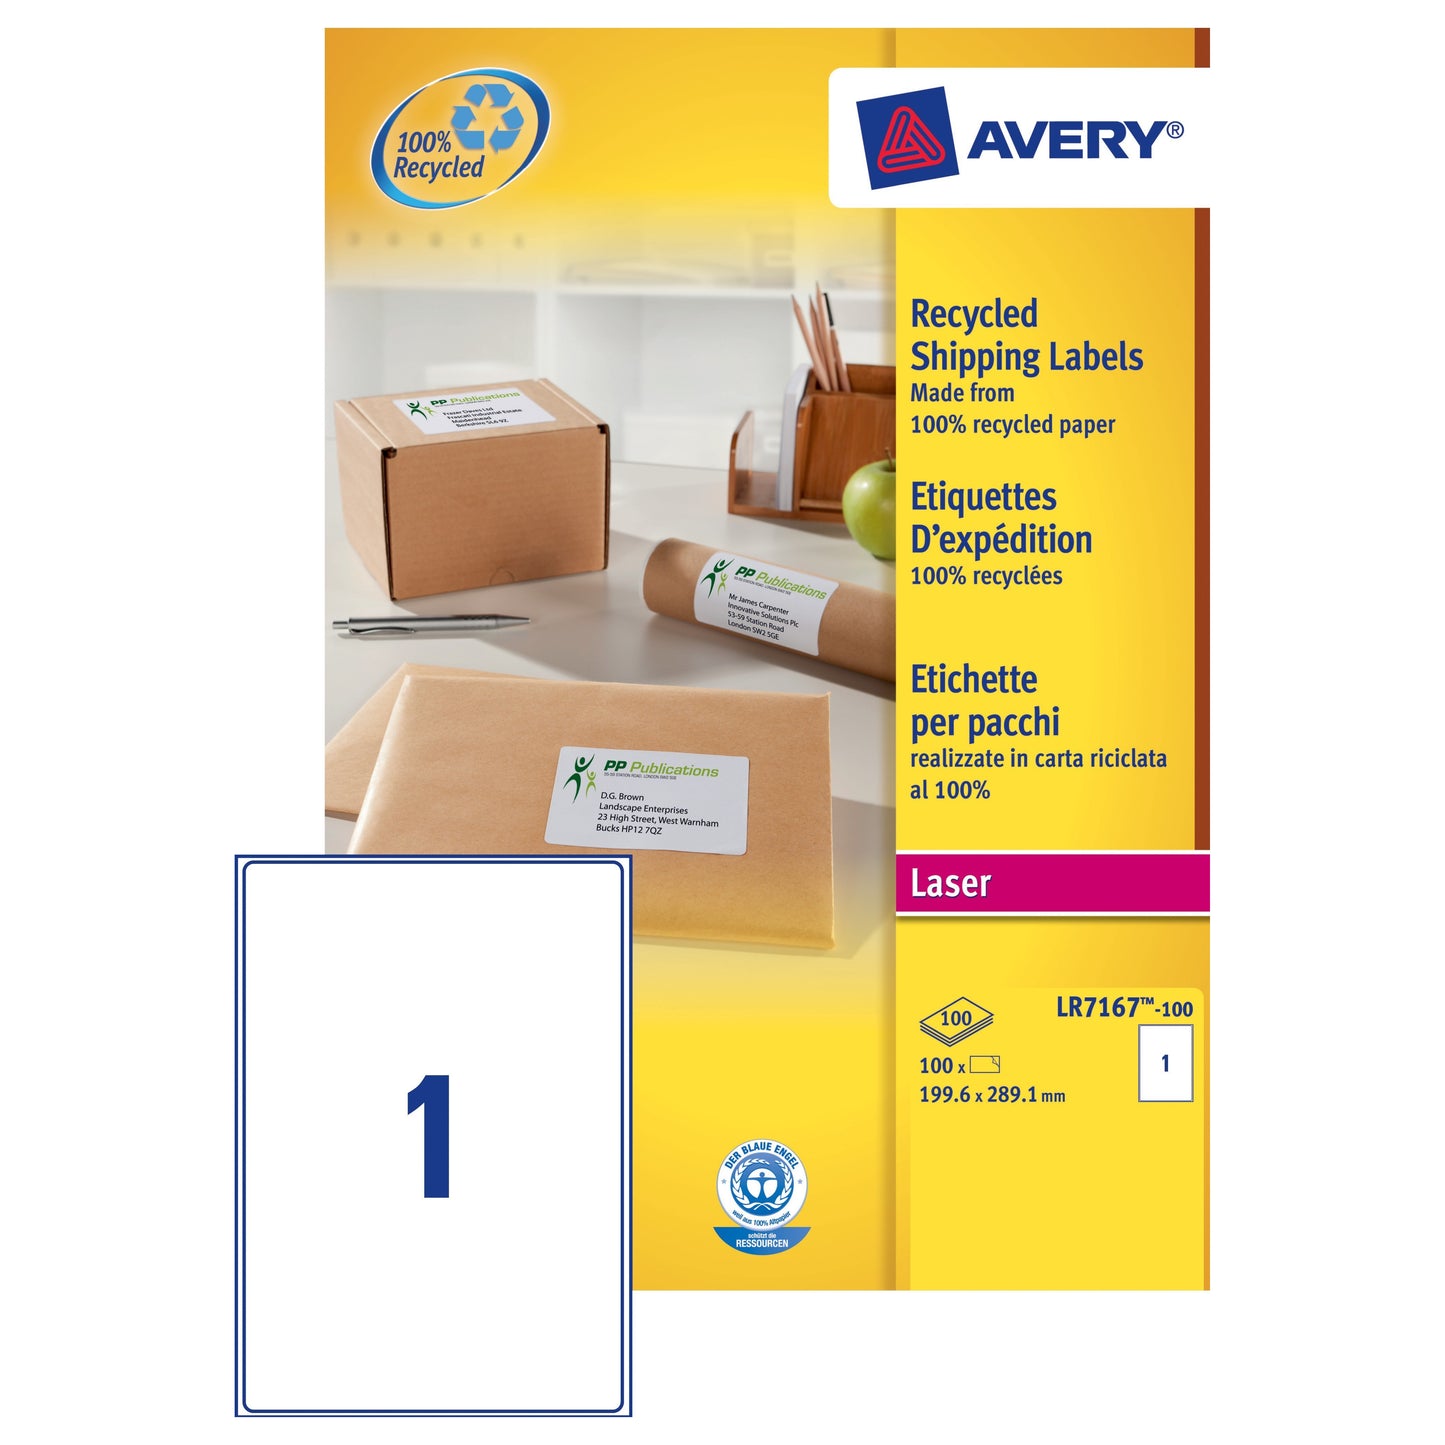 Avery Recycled Label 199.6x289.1 (100) LR7167